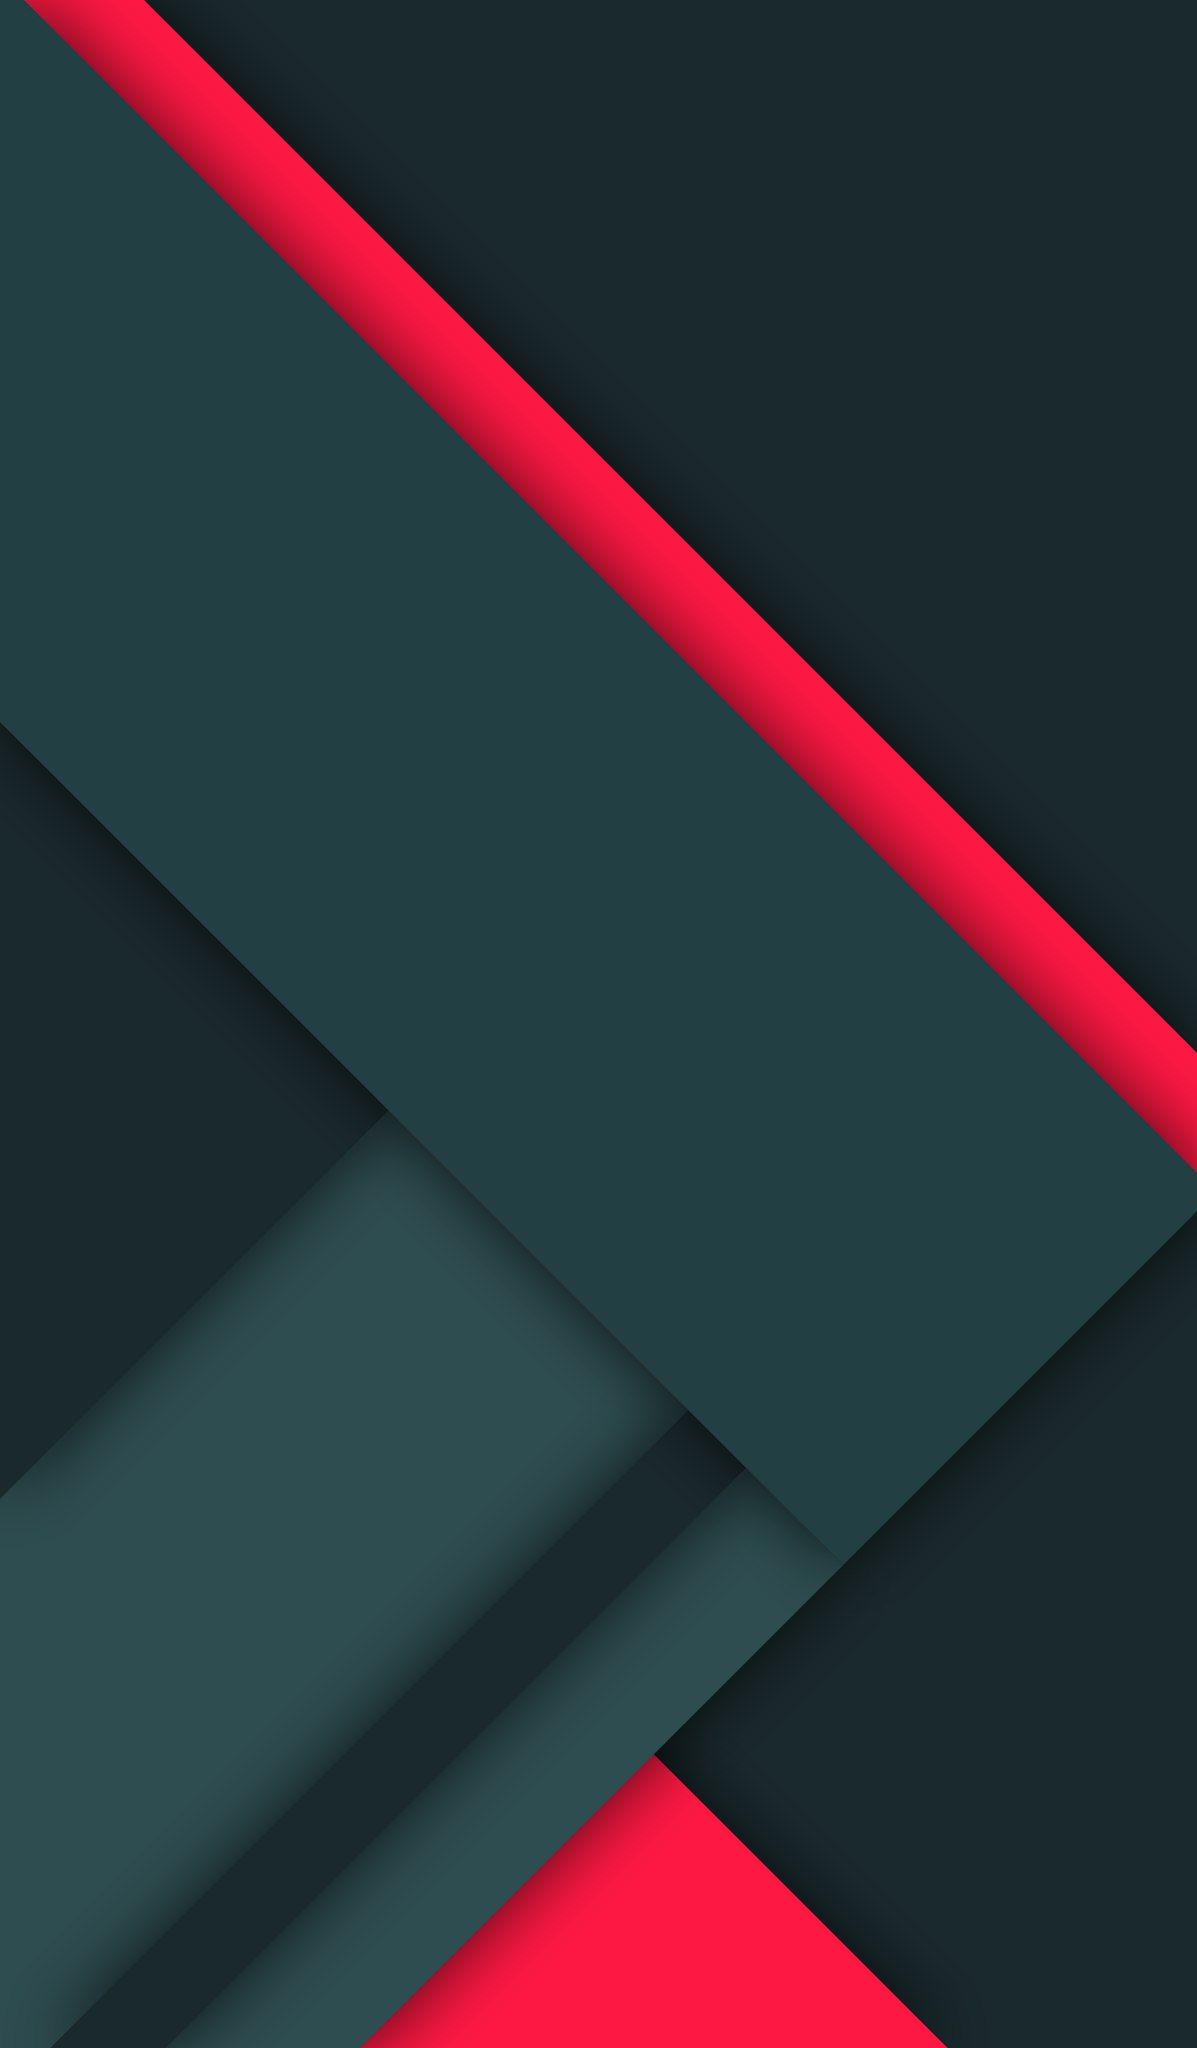 Material design wallpaper. Abstract iphone wallpaper, Material design, Designer wallpaper